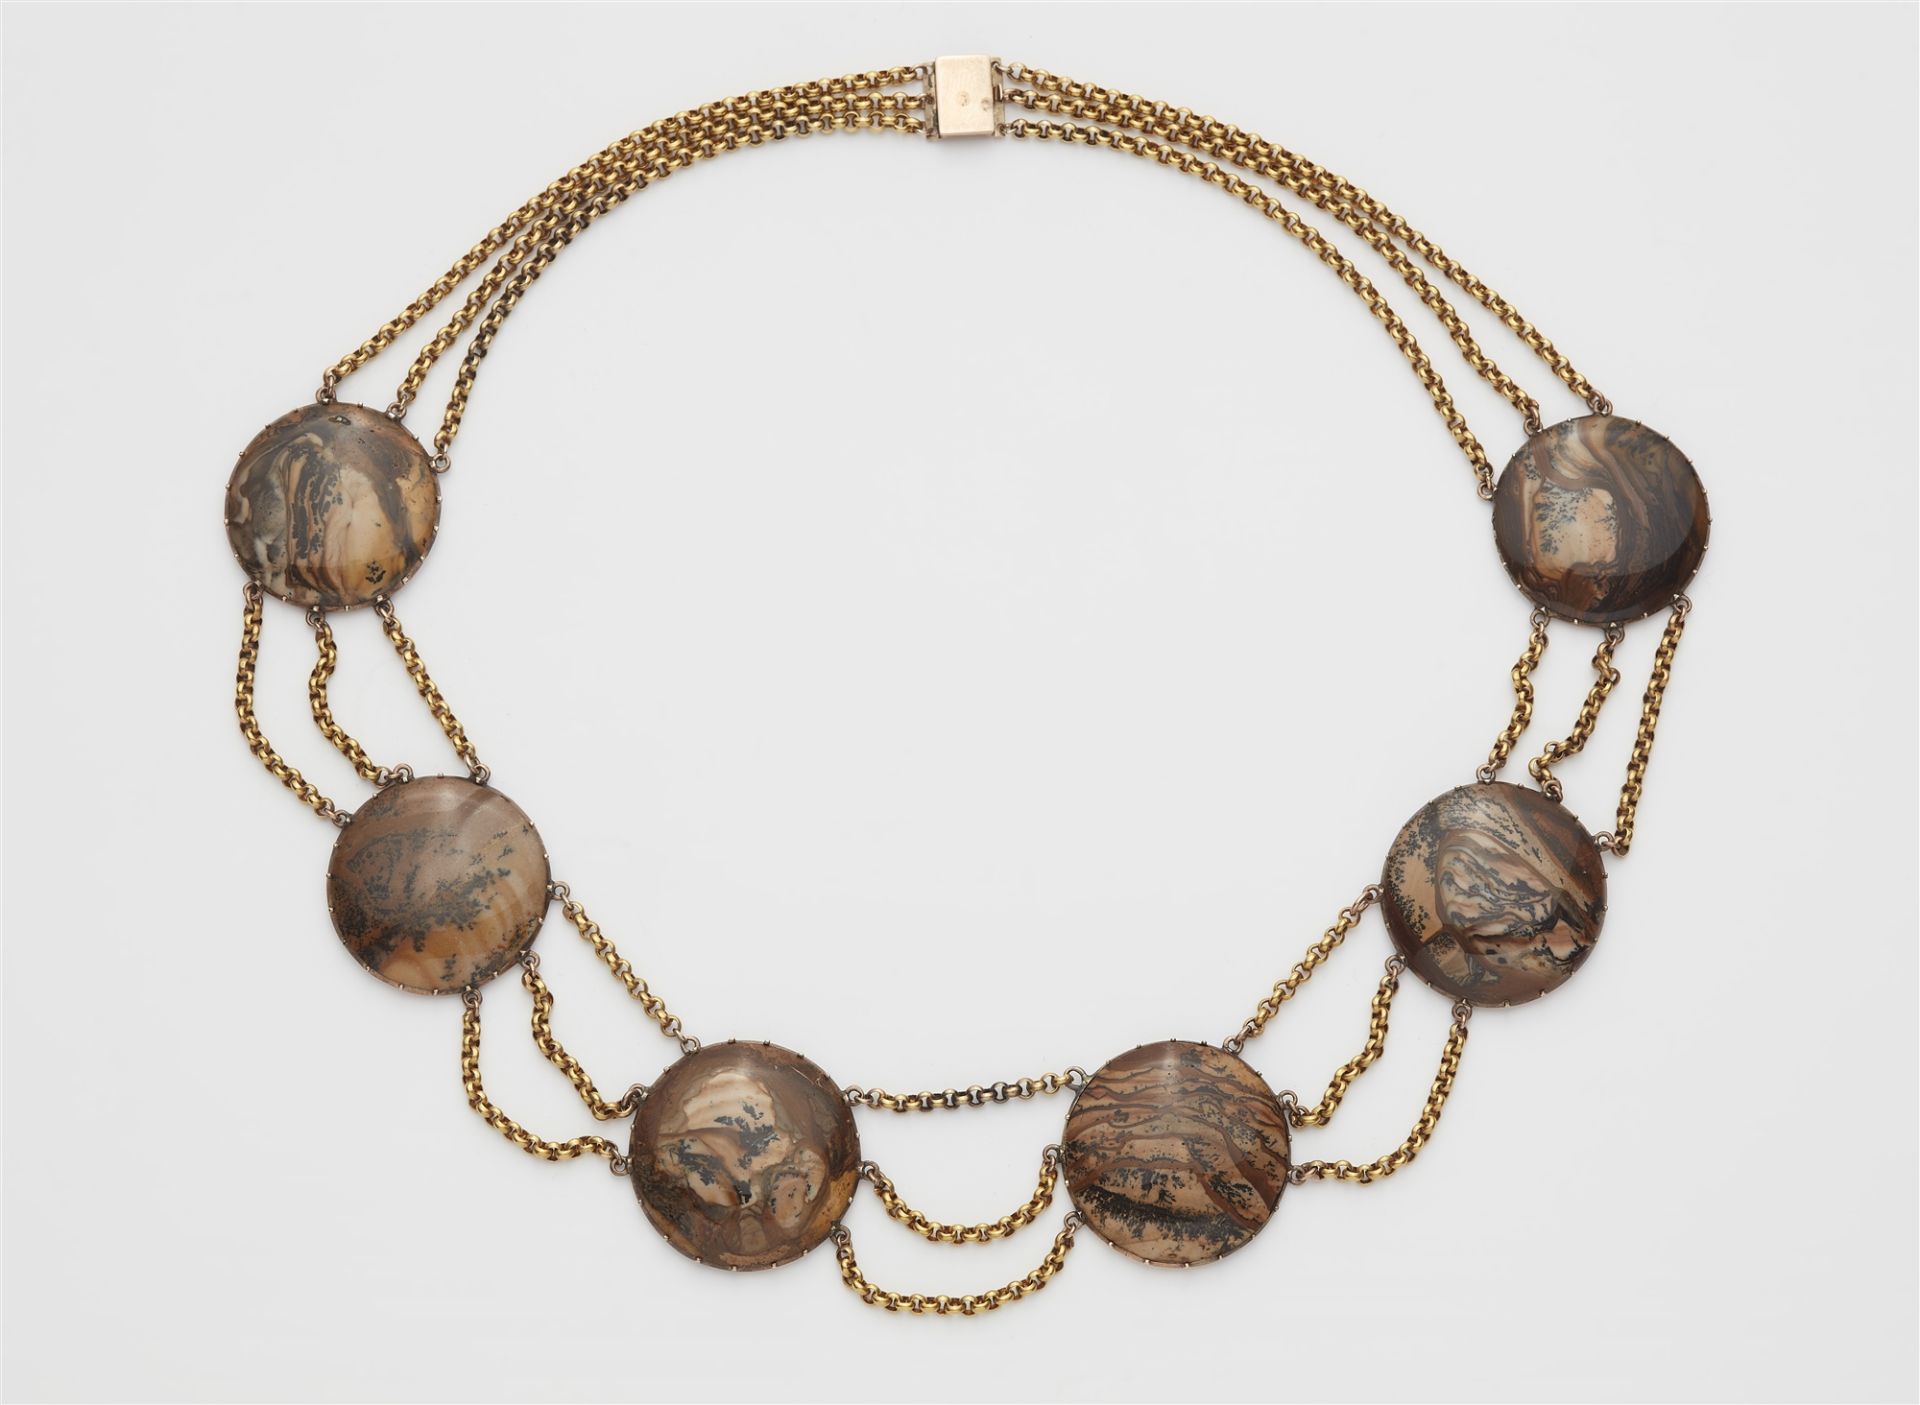 A possibly English 14k gold and landscape agate garland necklace.